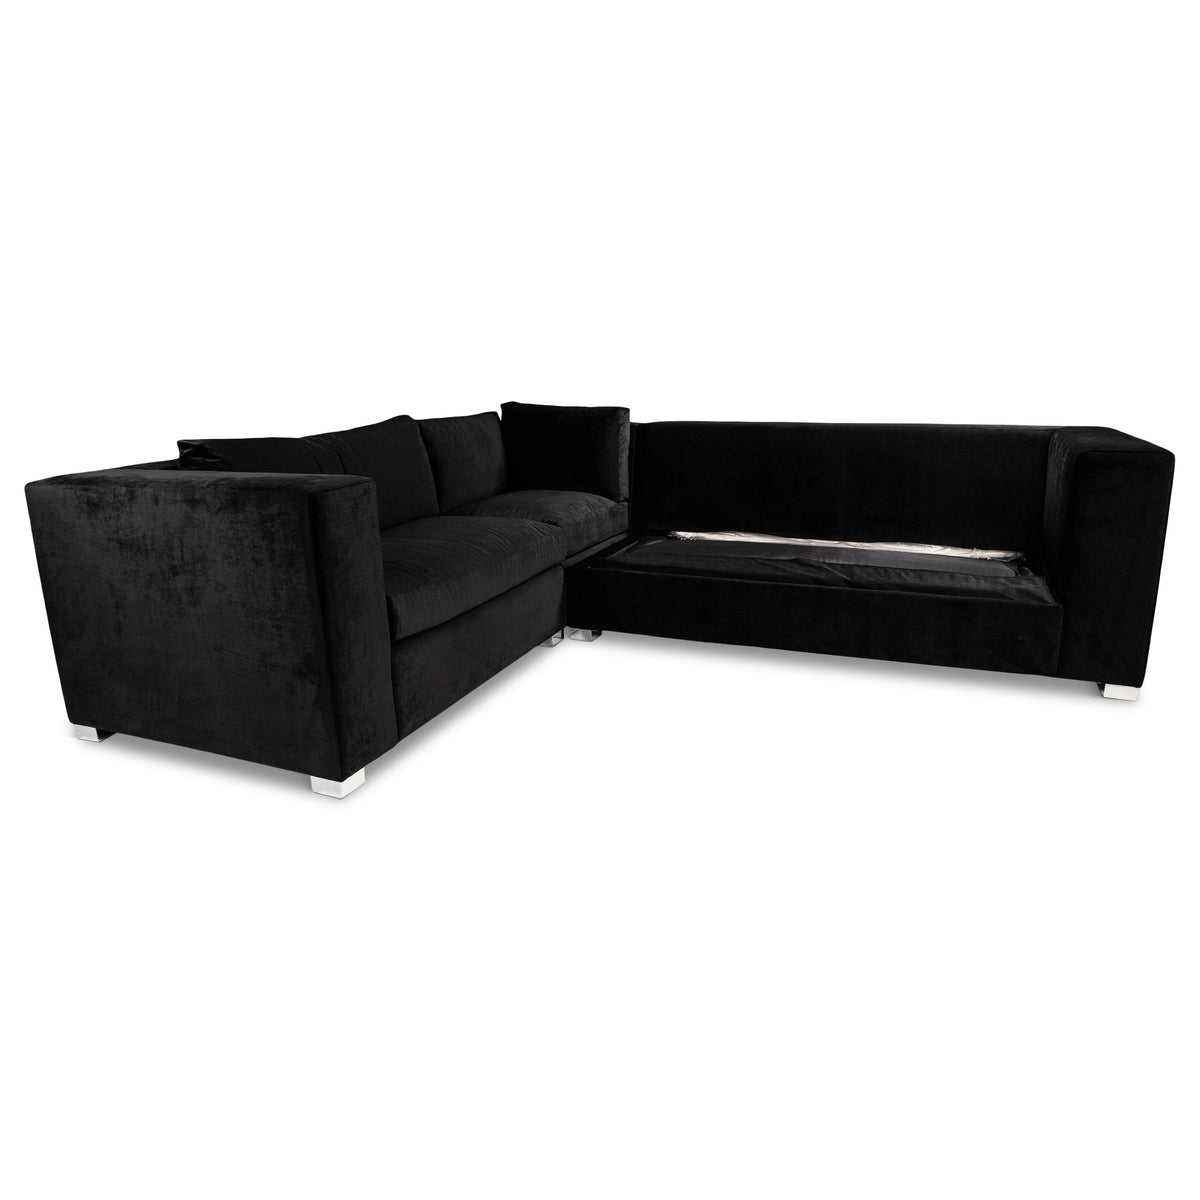 Mr. Smith Sectional